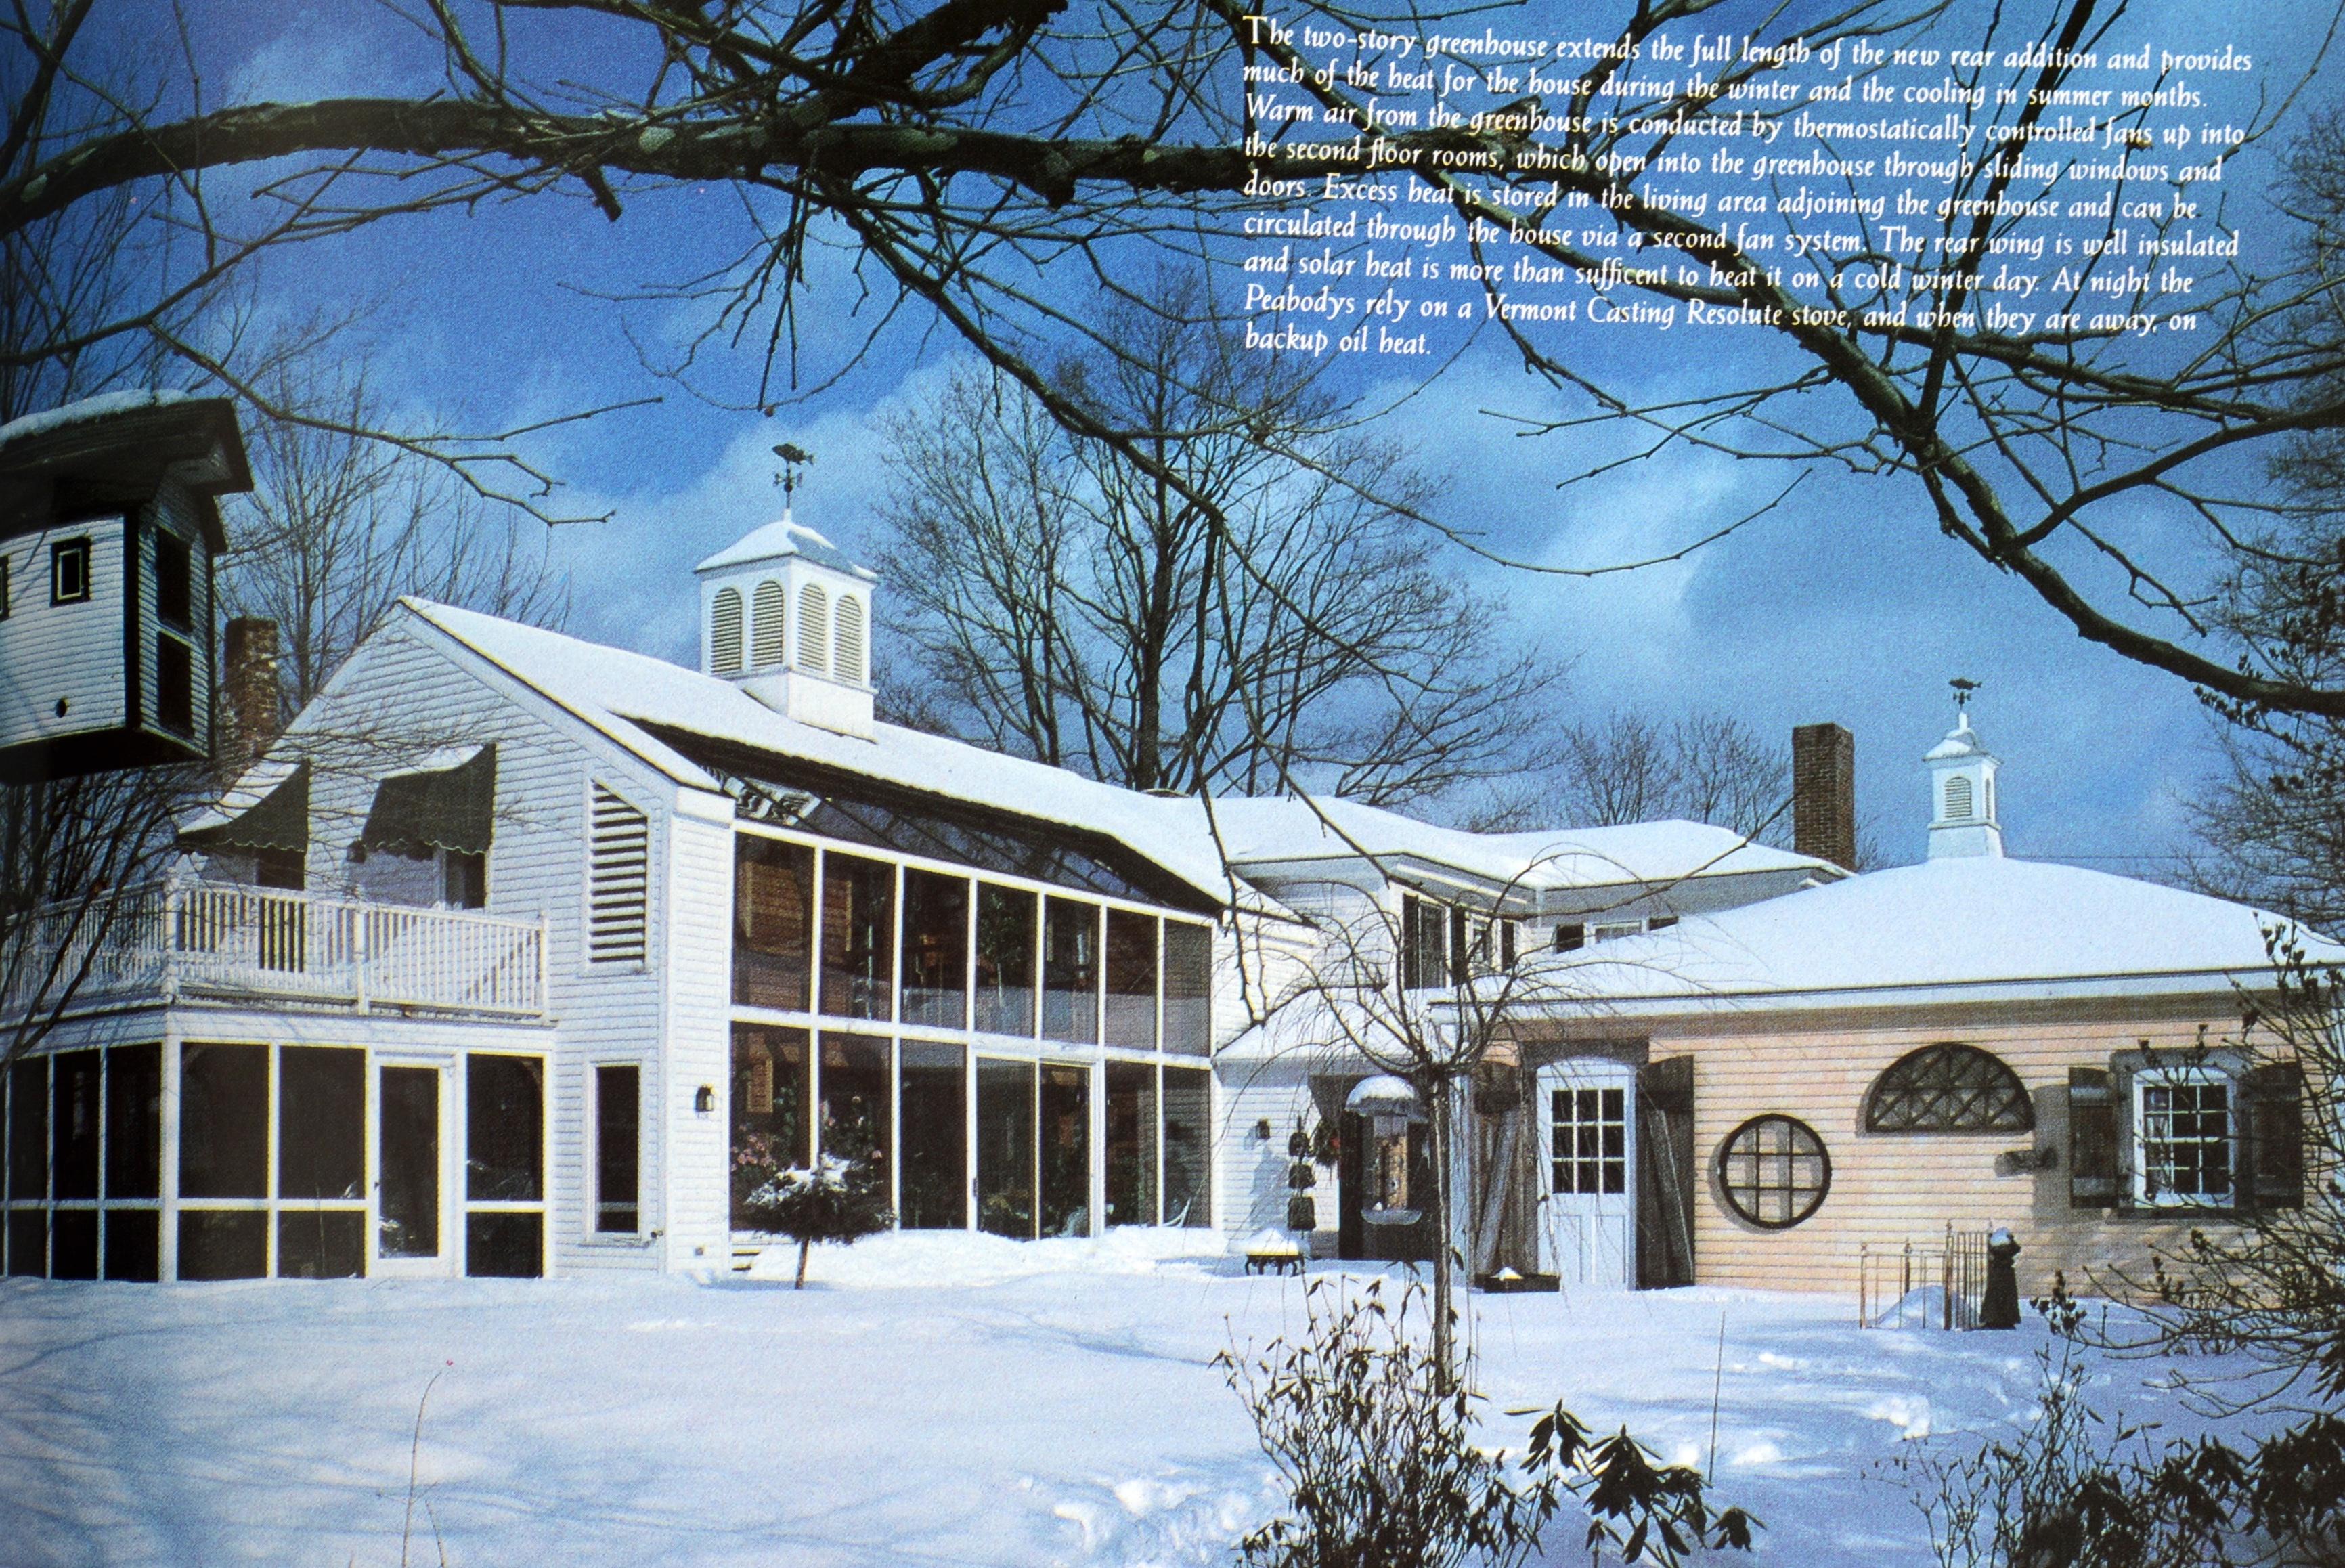 The New England Colonial: American Design Series Anne Elizabeth Powell. New York: Bantam, 1988. 1st Ed hardcover with dust jacket. 247 pages; An extraordinary collection of important American homesteads. With a photo of the house, description